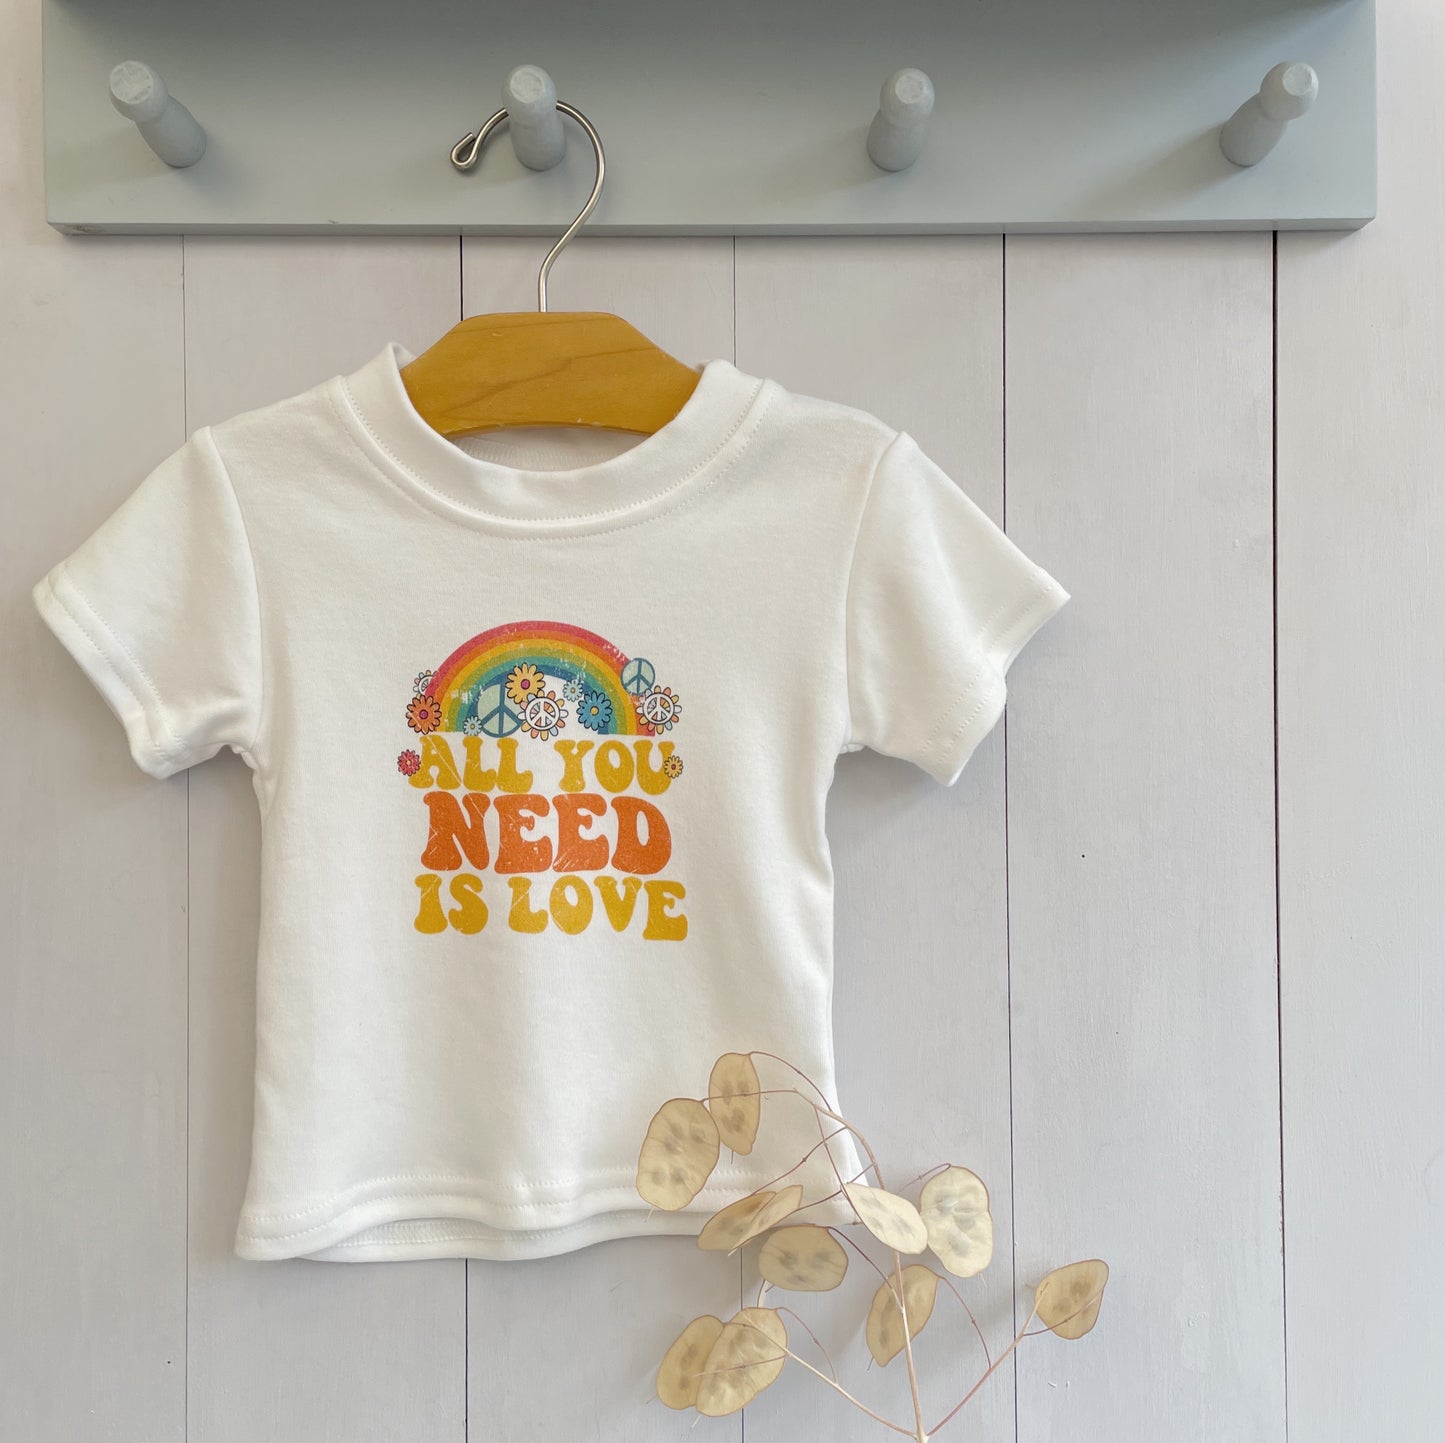 100% organic baby clothing. gots certified baby t-shirt. baby shower gift for new mothers. retro inspired baby clothing. image by adrestiasrevolt.co.uk